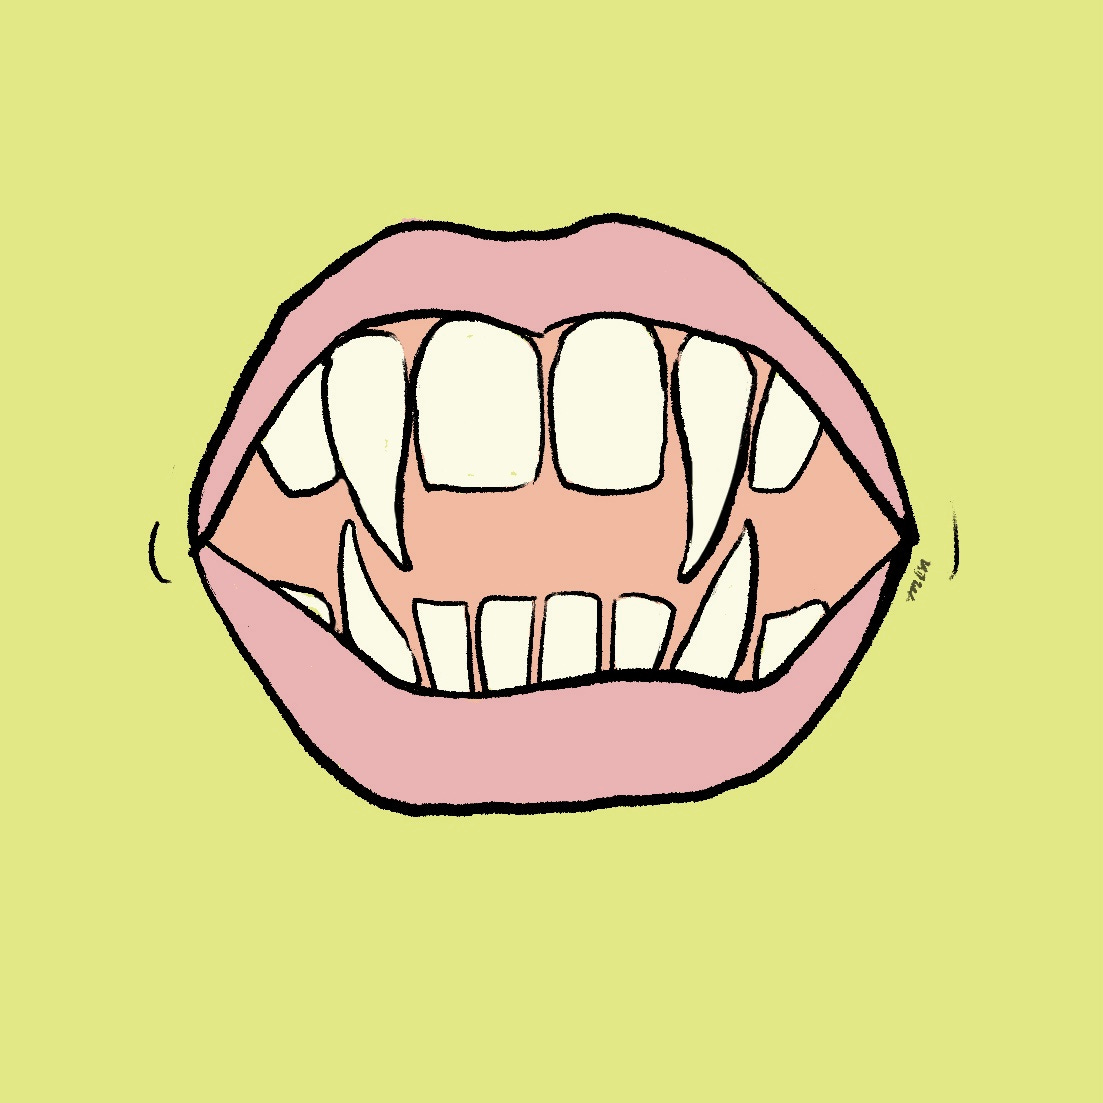 An illustration of an open mouth, displaying fanged teeth.